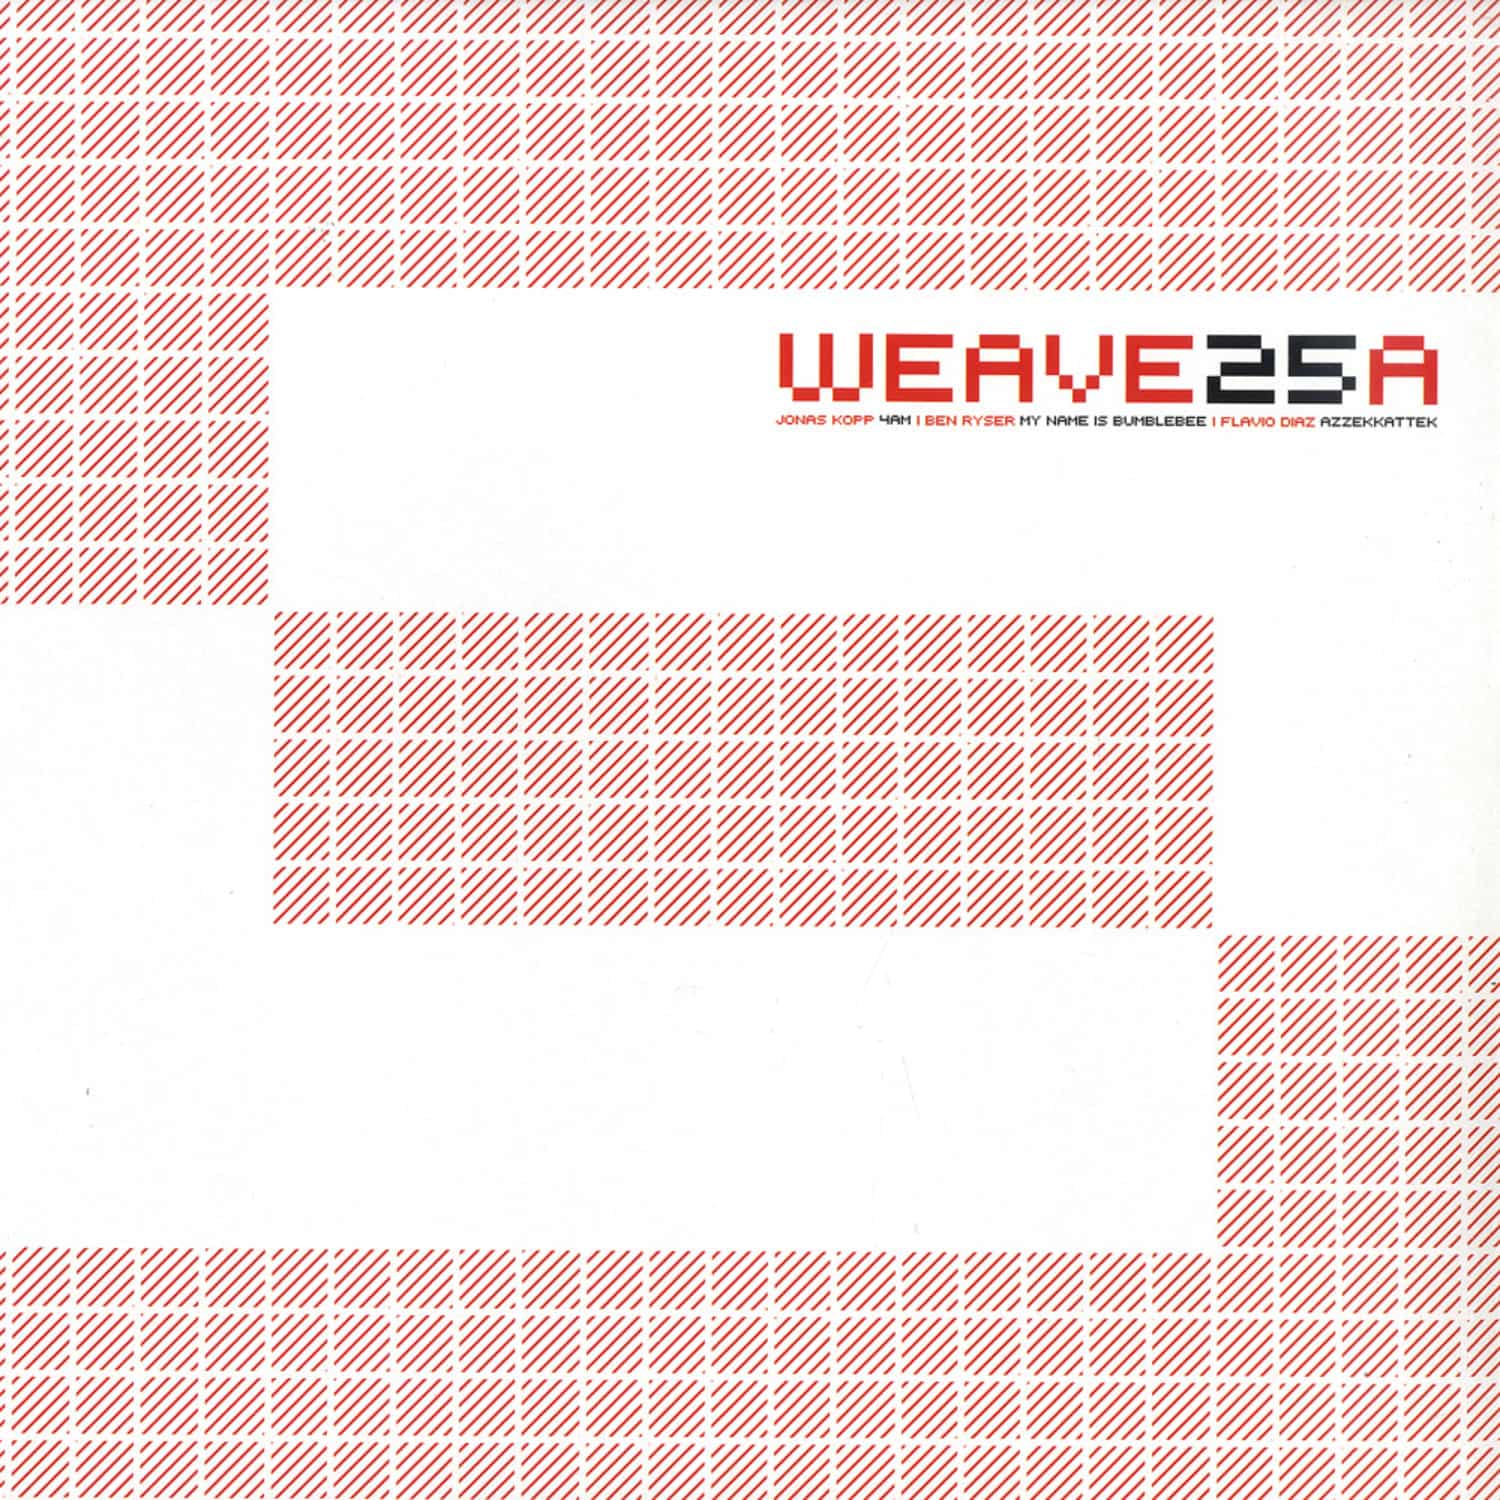 Weave Music Pres - 5 YEARS PART 1